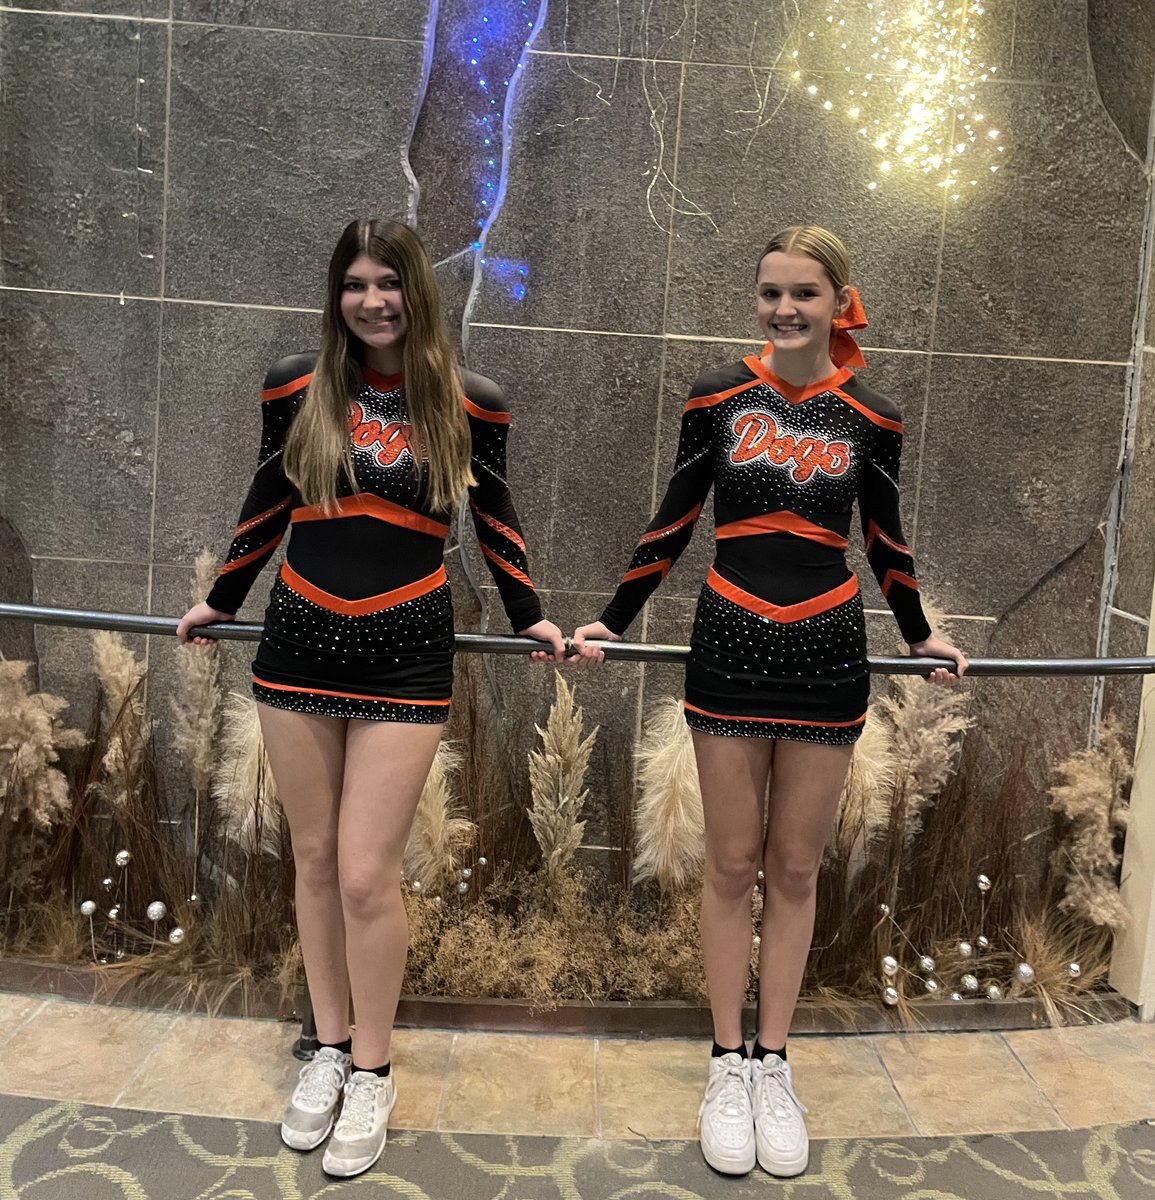 It’s an AMAZING accomplishment for a Cheer Team to ever have one Cheerleader make finalist for the Illinois Cheer Coaches Association Scholarship, our @WaterlooHSCheer Team has two finalists, this year! @WCUSD5Athletics @athletic_whs @WHS_OrangeCrush @republictimes @garyschmidt